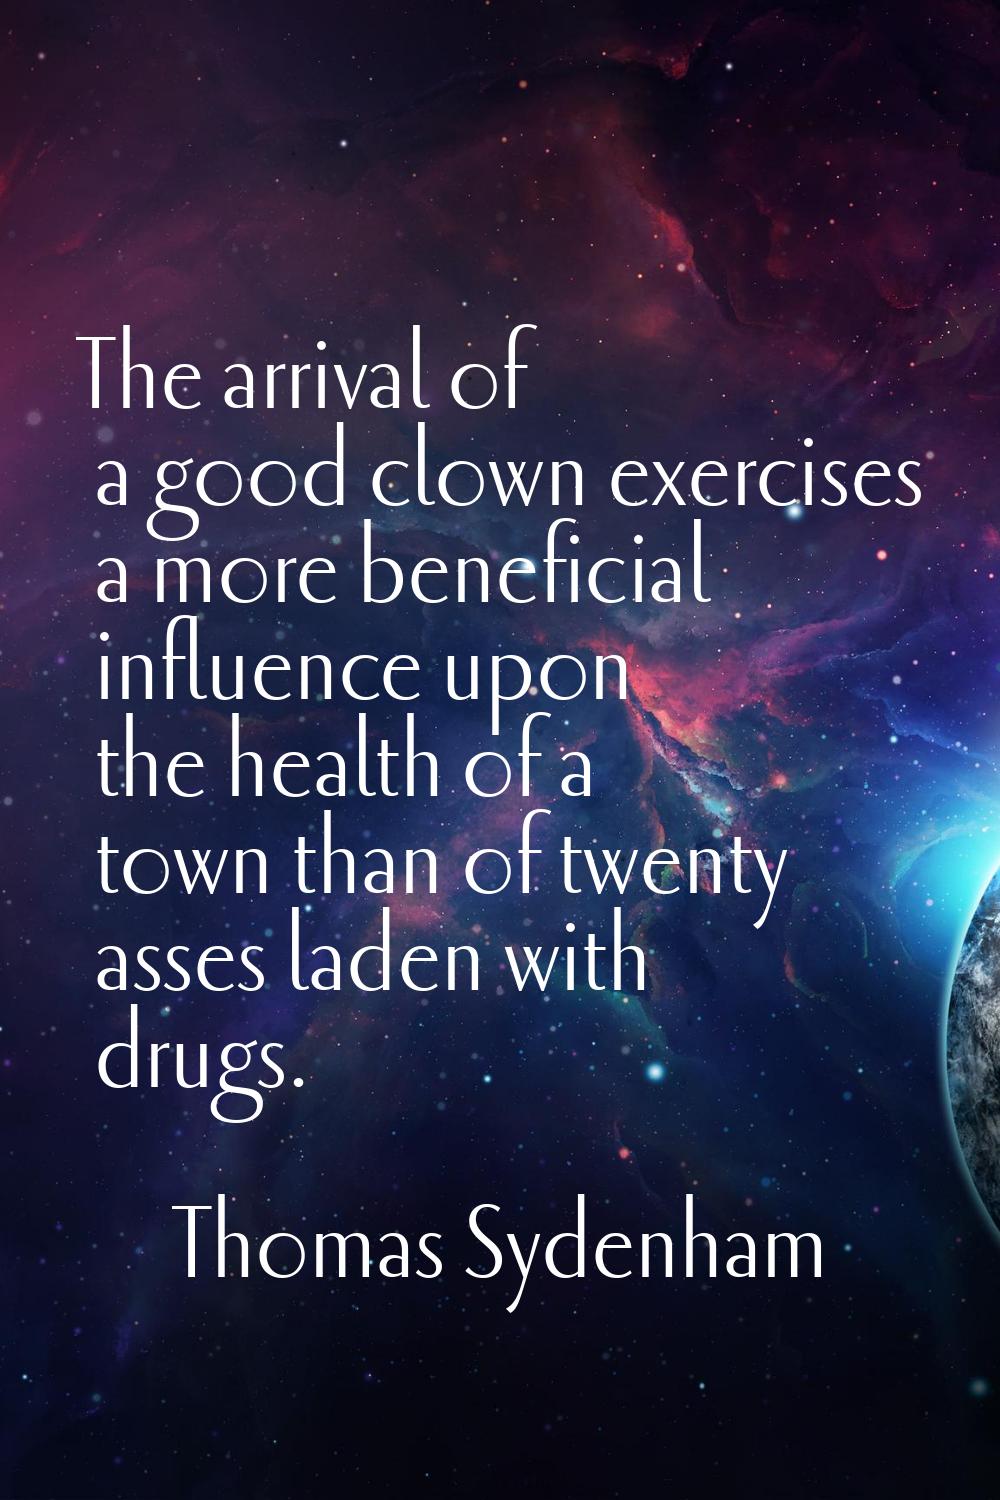 The arrival of a good clown exercises a more beneficial influence upon the health of a town than of